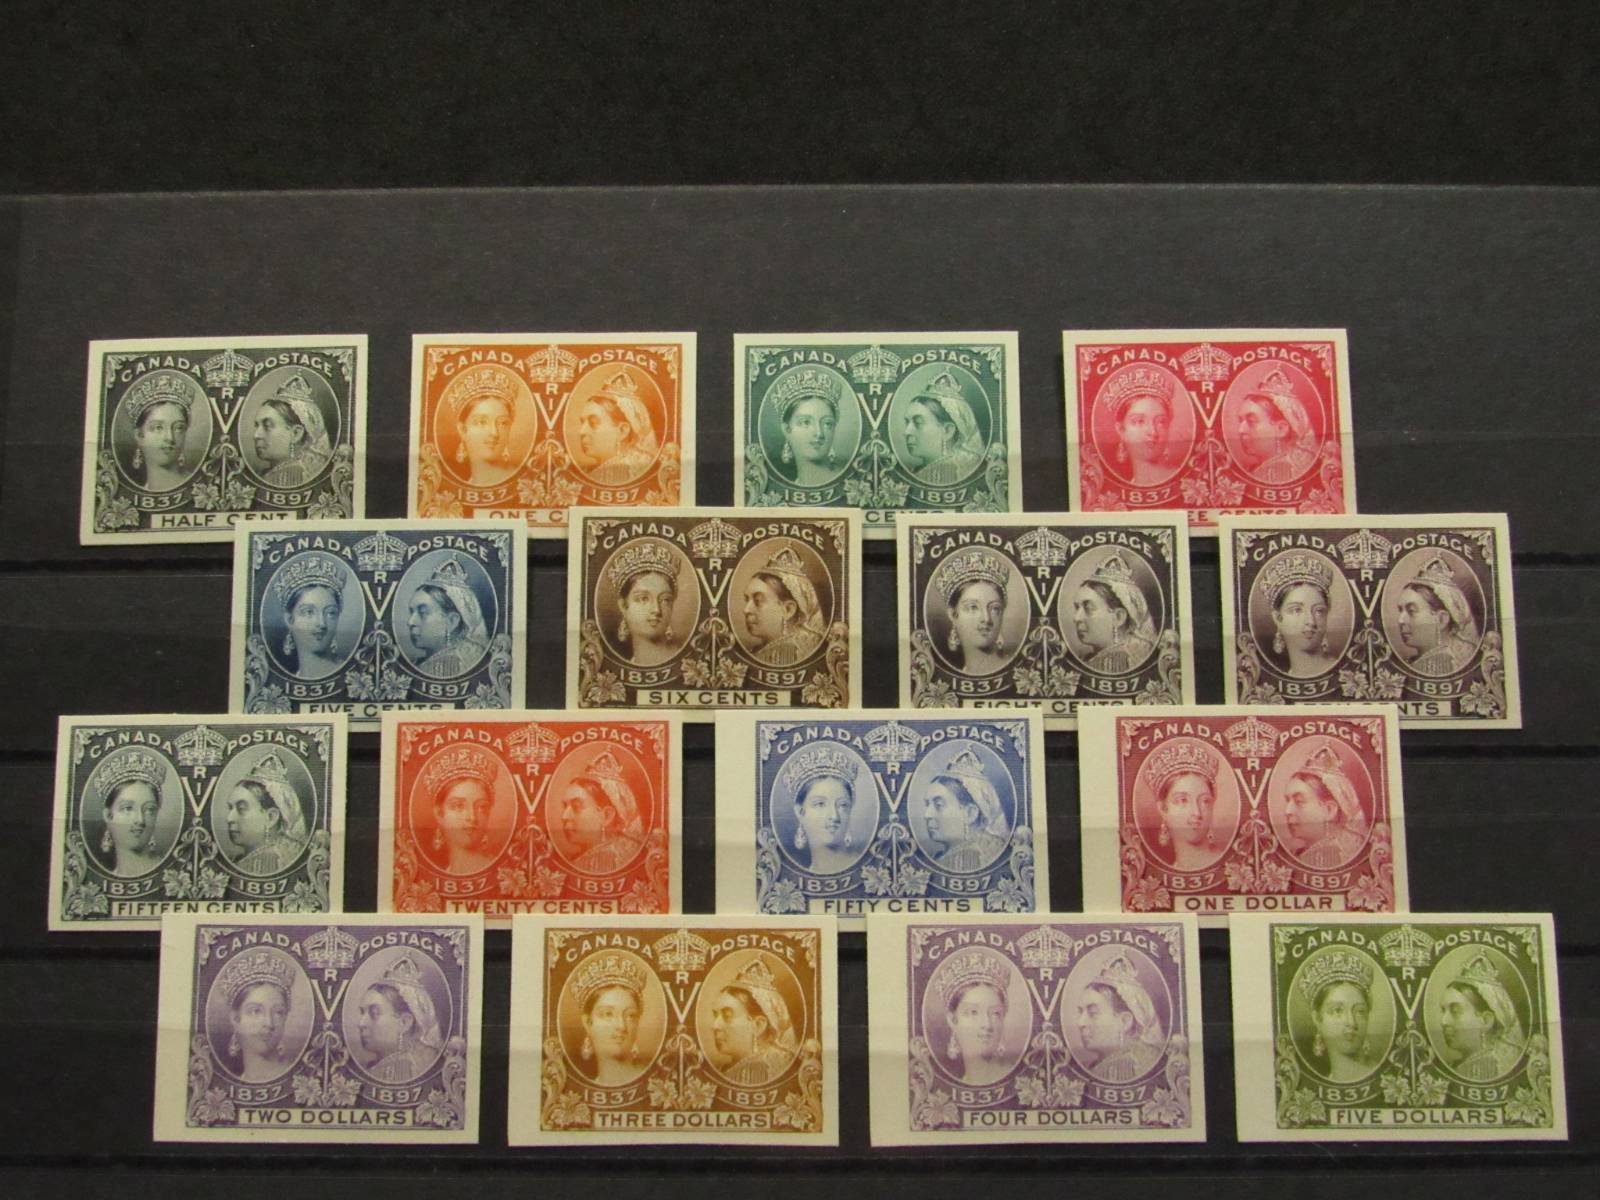 CANADA Un 50P-65P 1/2&cent;-$5 JUBILEE On Card PROOF Set =$7,000 CV!

Auction ends TOMORROW: Thursday May 9th at 8:09pm EST

View the auction and bid: https://www.ebay.com/itm/386969799150